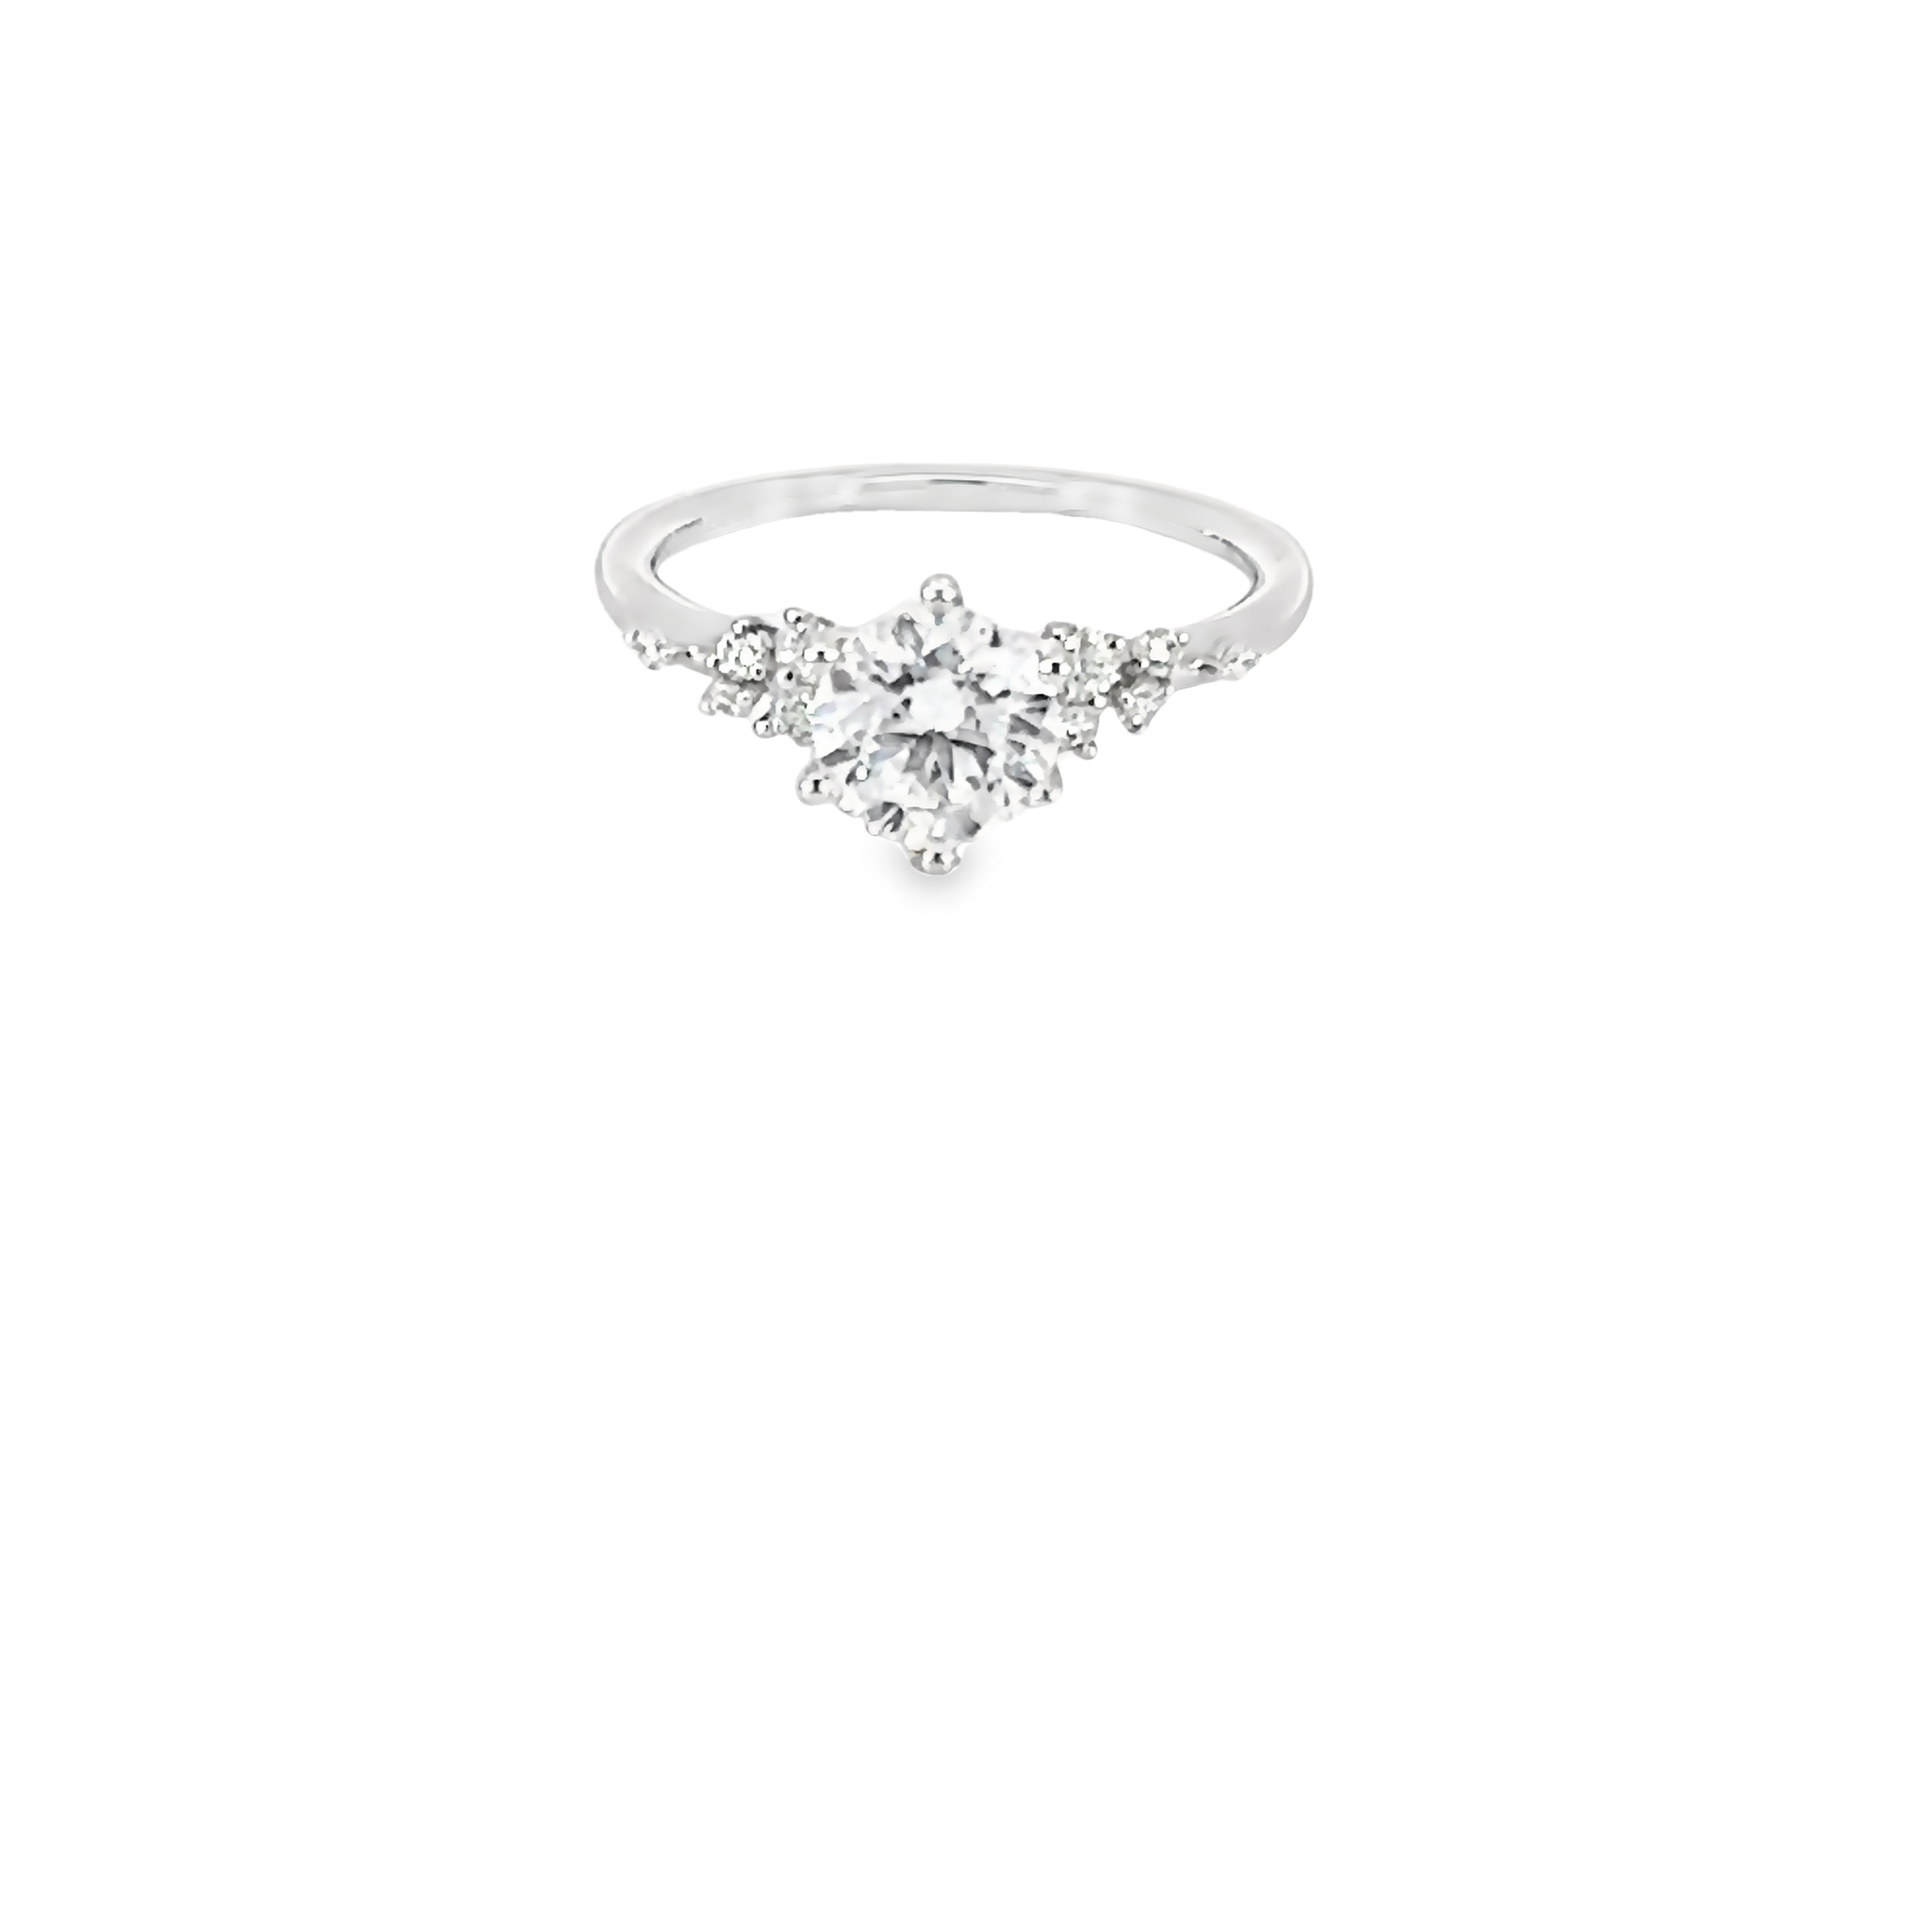 14 Karat White Gold Semi Mount Engagement Ring With 10=0.17 Total Weight Round Brilliant G Vs Diamonds. Size 6.25